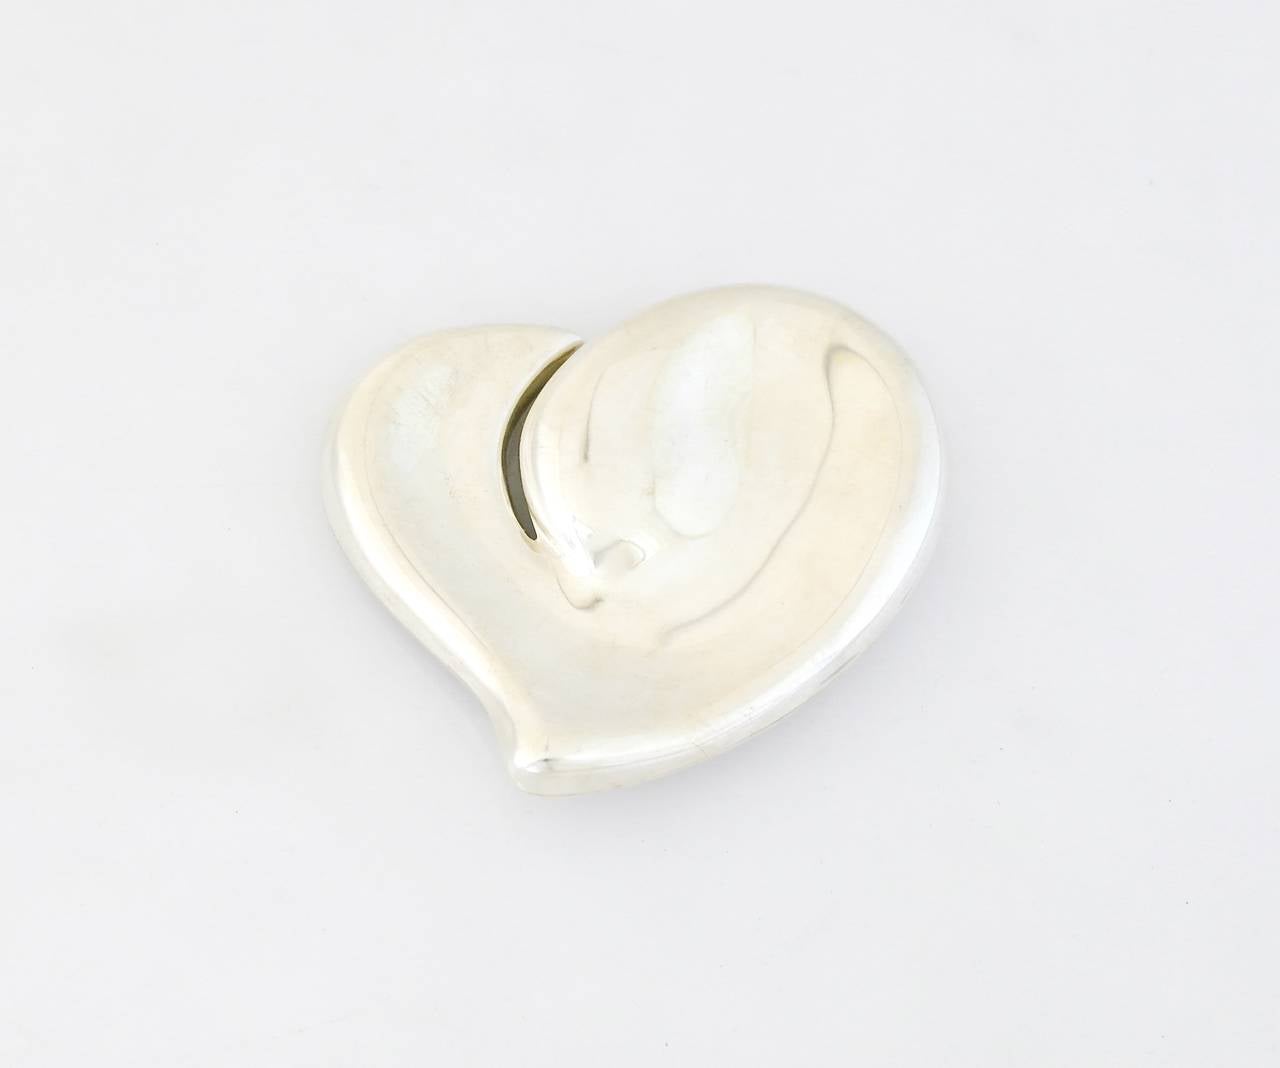 Being offered is a circa 1978 sterling silver belt buckle designed by Elsa Peretti for Tiffany & Co., comprising a figural modernist heart shaped form produced in Italy. Dimensions: 4